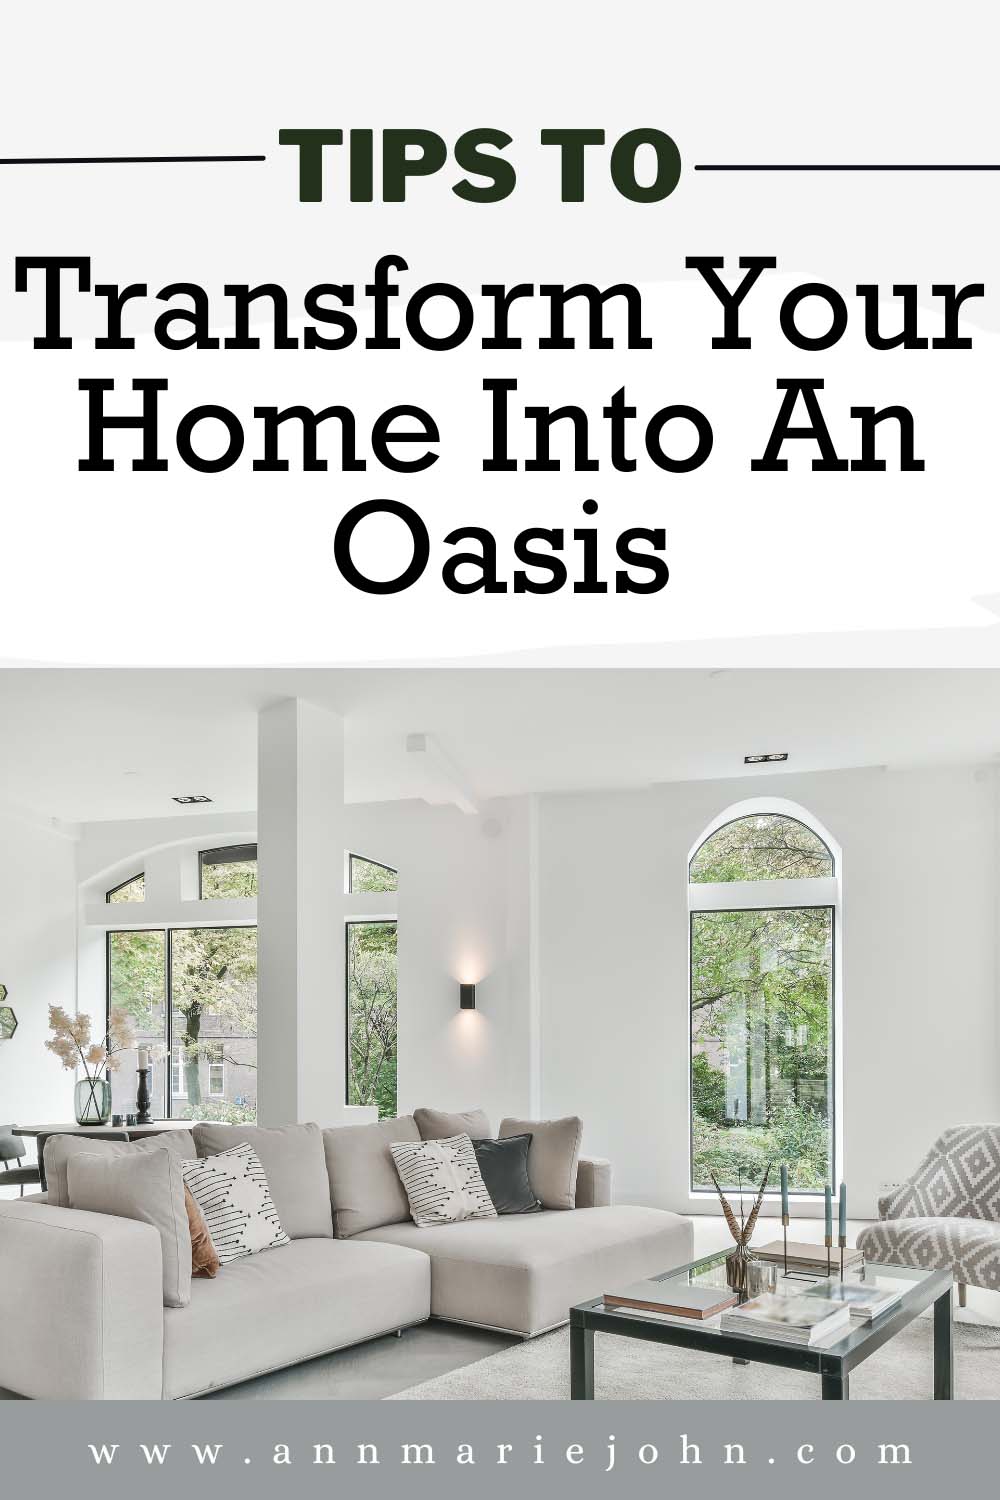 Transform Your Home Into An Oasis